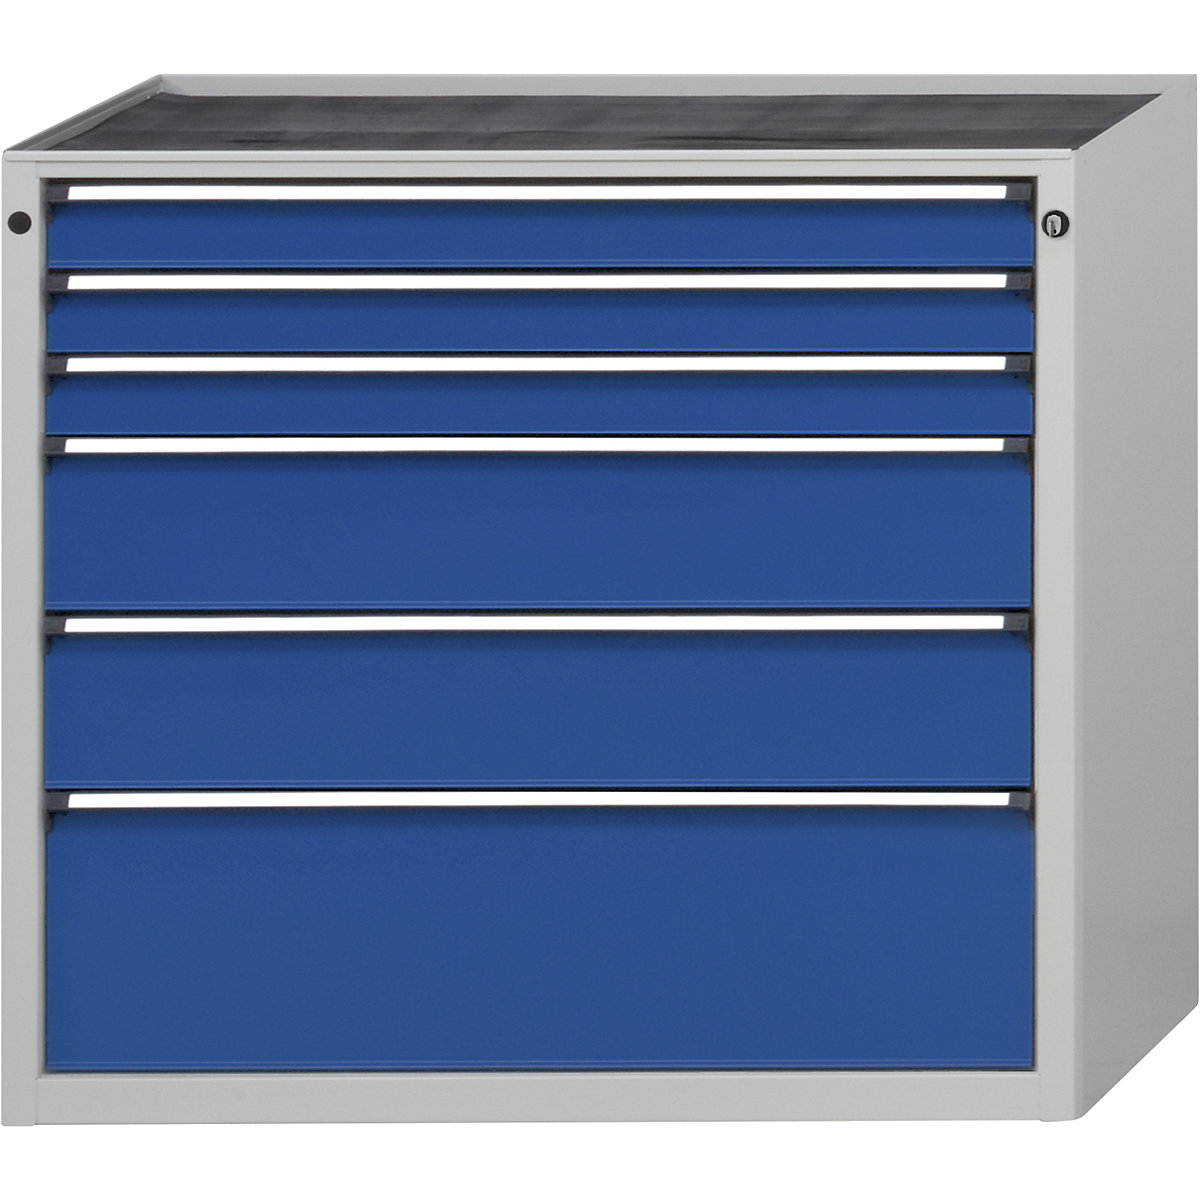 Drawer cupboard without worktop – ANKE, width 1060 mm, max. drawer load 200 kg, 6 drawers, front in gentian blue-4